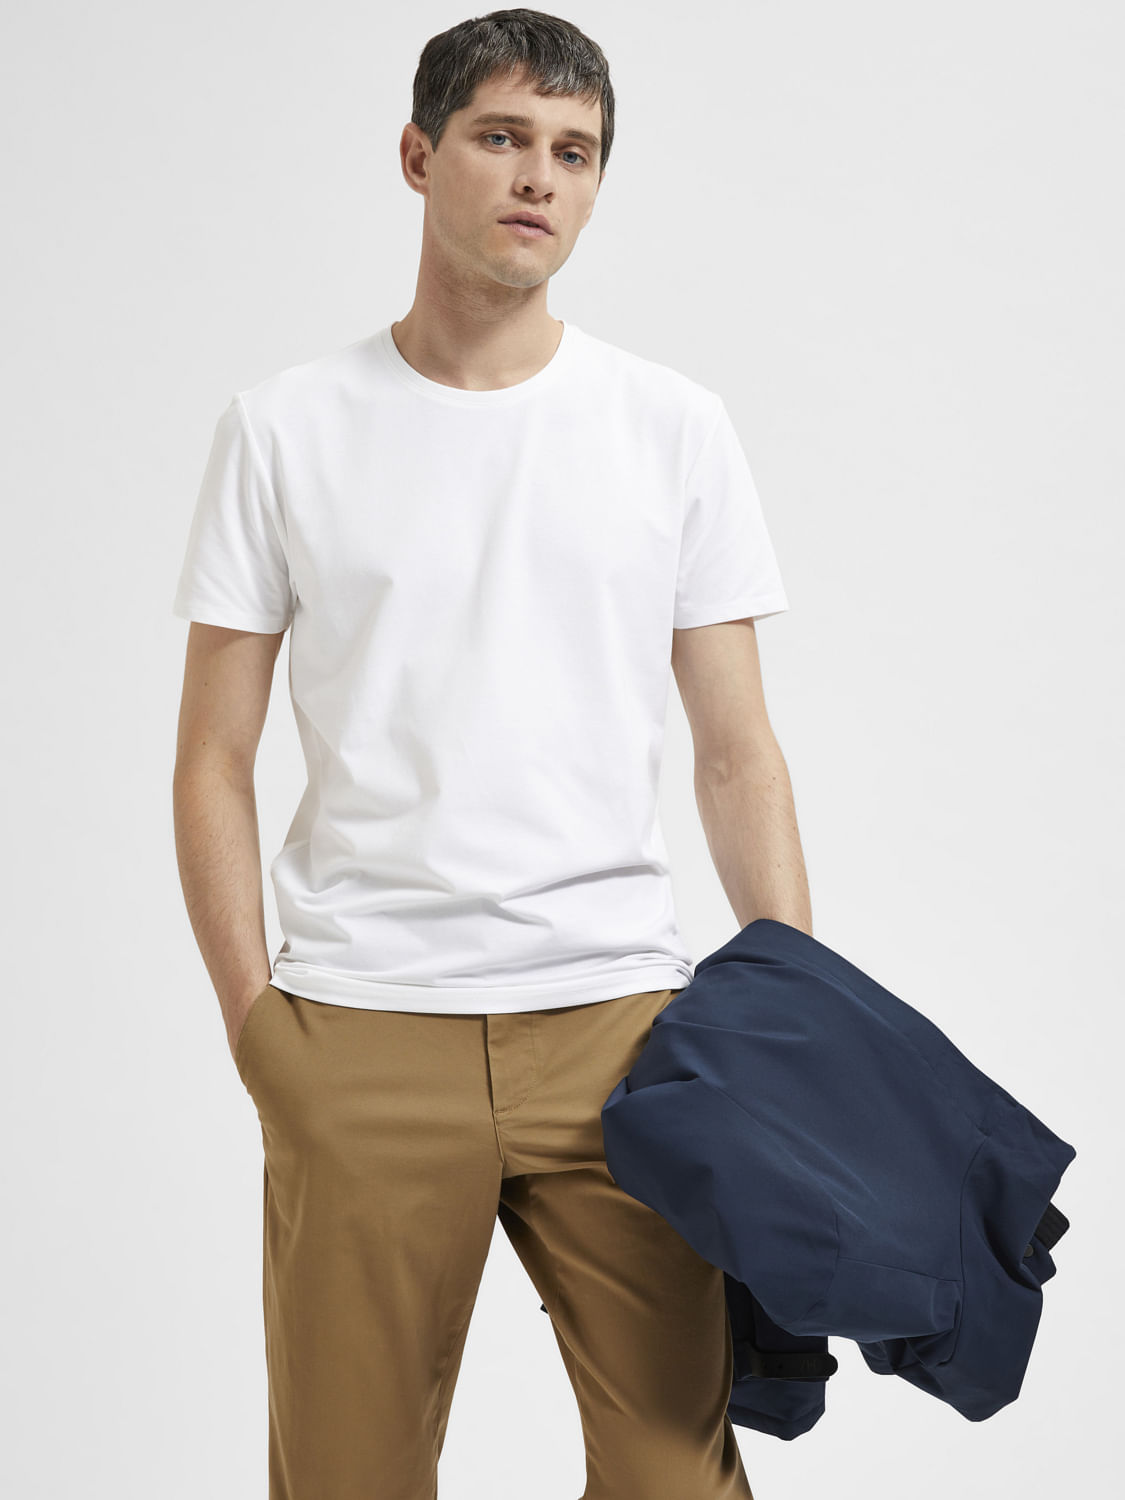 Man in White Tshirt and Brown Pants Wearing White Cap  Free Stock Photo